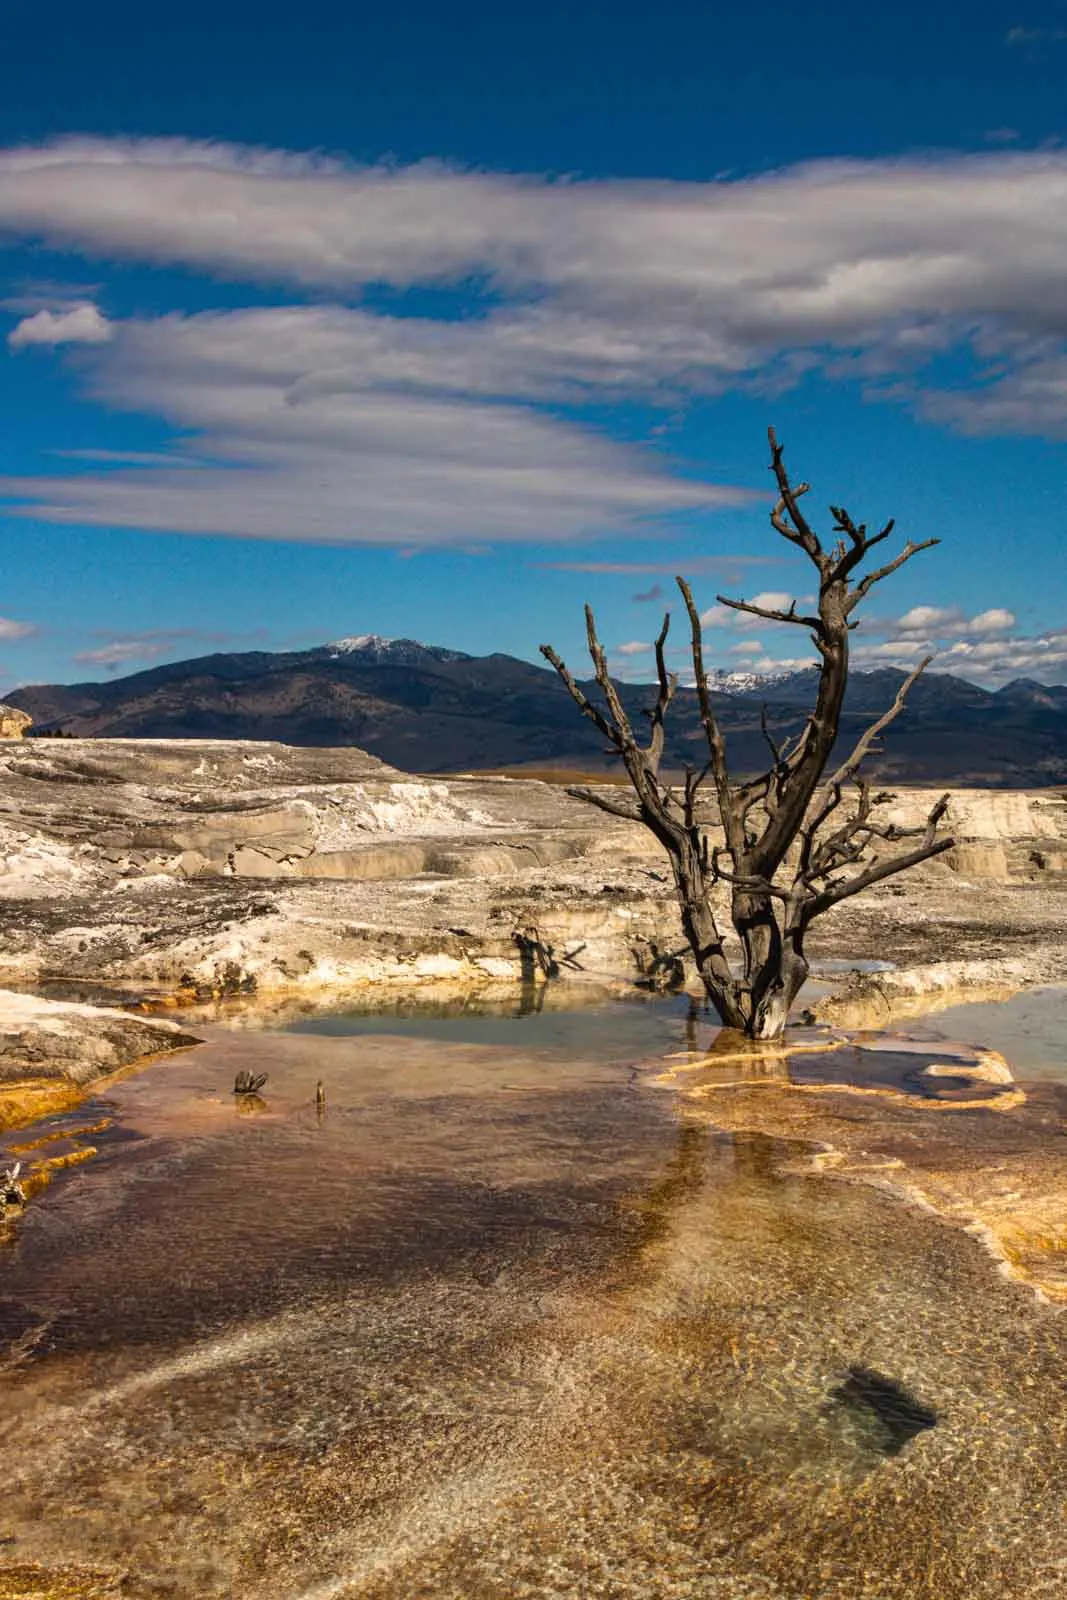 A view of Mammoth - one of the many things to do in Yellowstone